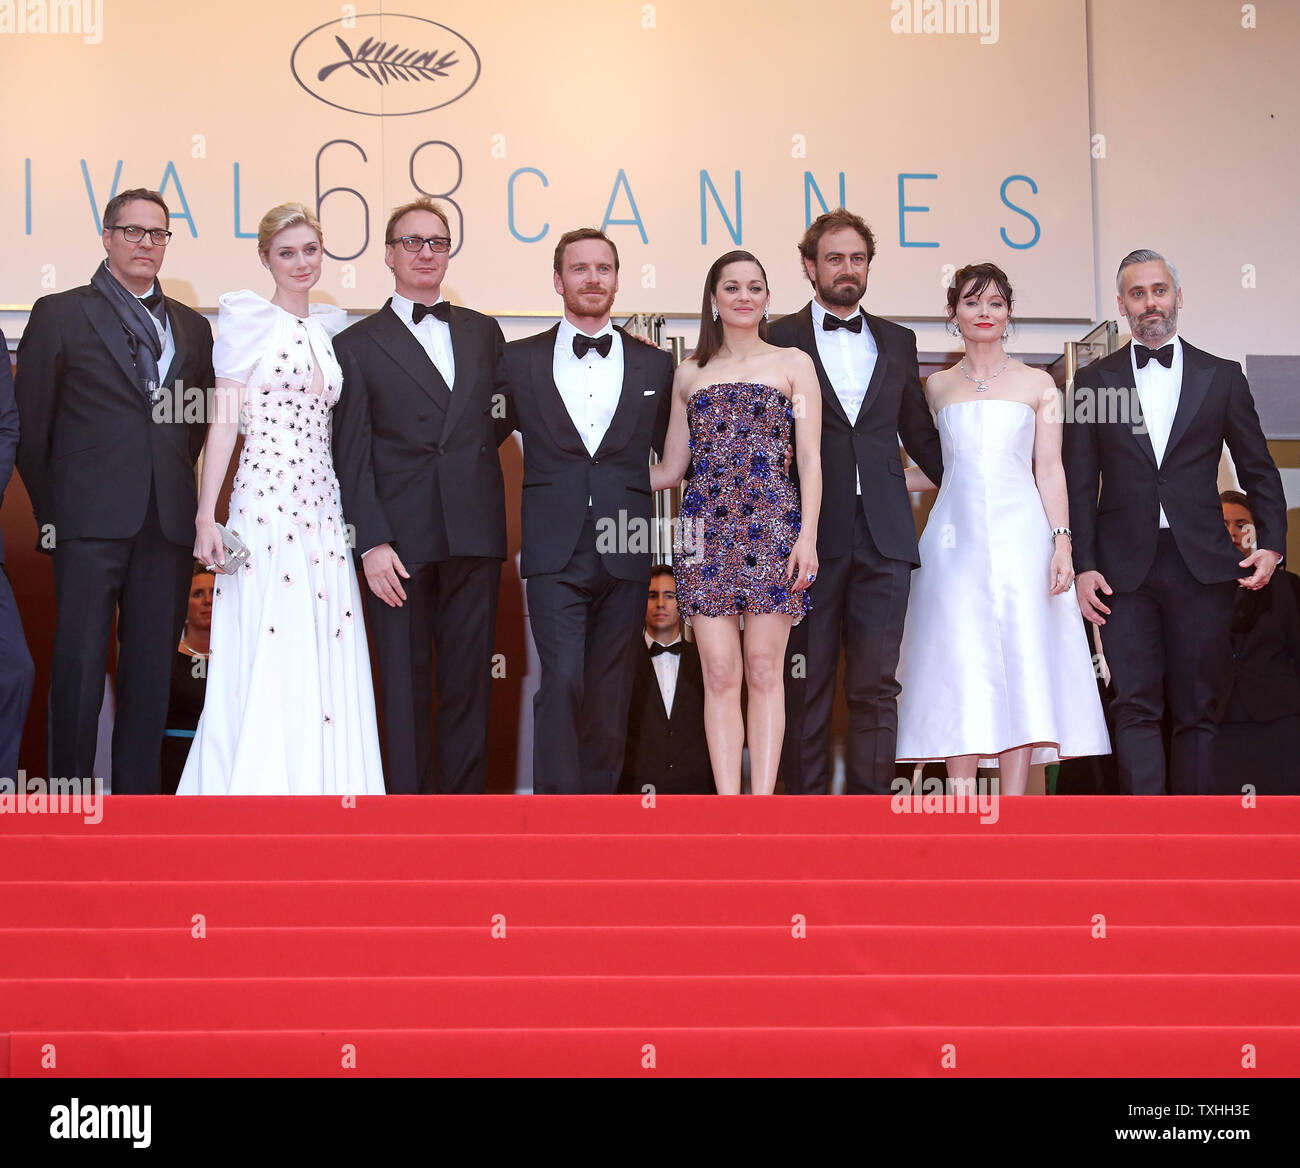 Elizabeth Debicki, David Thewlis,Michael Fassbender,Marion Cotillard, Director Justin Kurzel, Actress Essie Davis and Producer Iain Canning  arrives on the steps of the Palais des Festivals before the screening of the film 'Macbeth' during the 68th annual Cannes International Film Festival in Cannes, France on May 23, 2015.  Photo by David Silpa/UPI.. Stock Photo